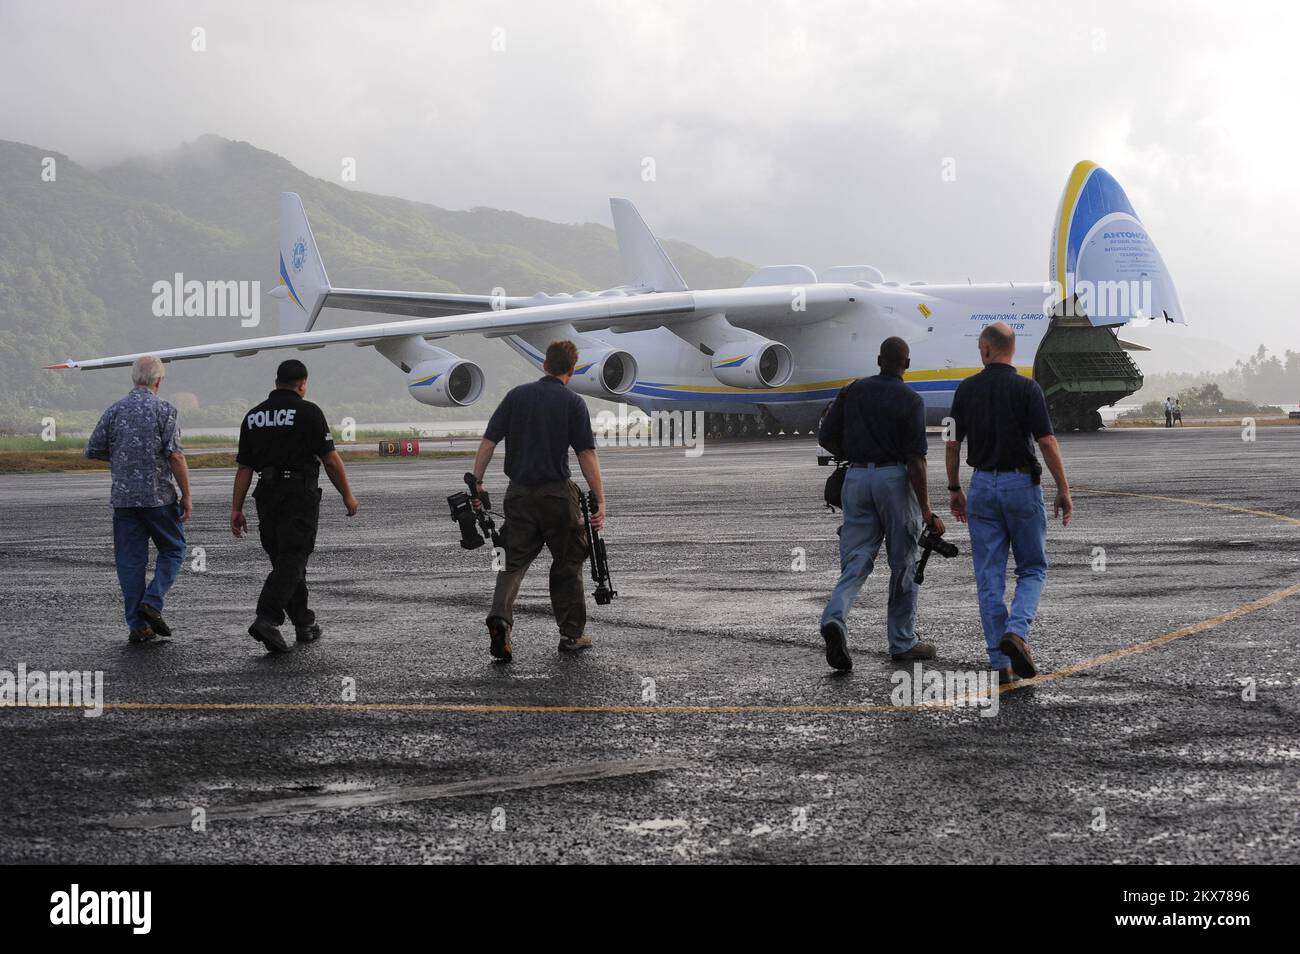 Federal Emergency Management Agency Staff Greet the Antonov Carg. American Samoa Earthquake, Tsunami, and Flooding. Photographs Relating to Disasters and Emergency Management Programs, Activities, and Officials Stock Photo